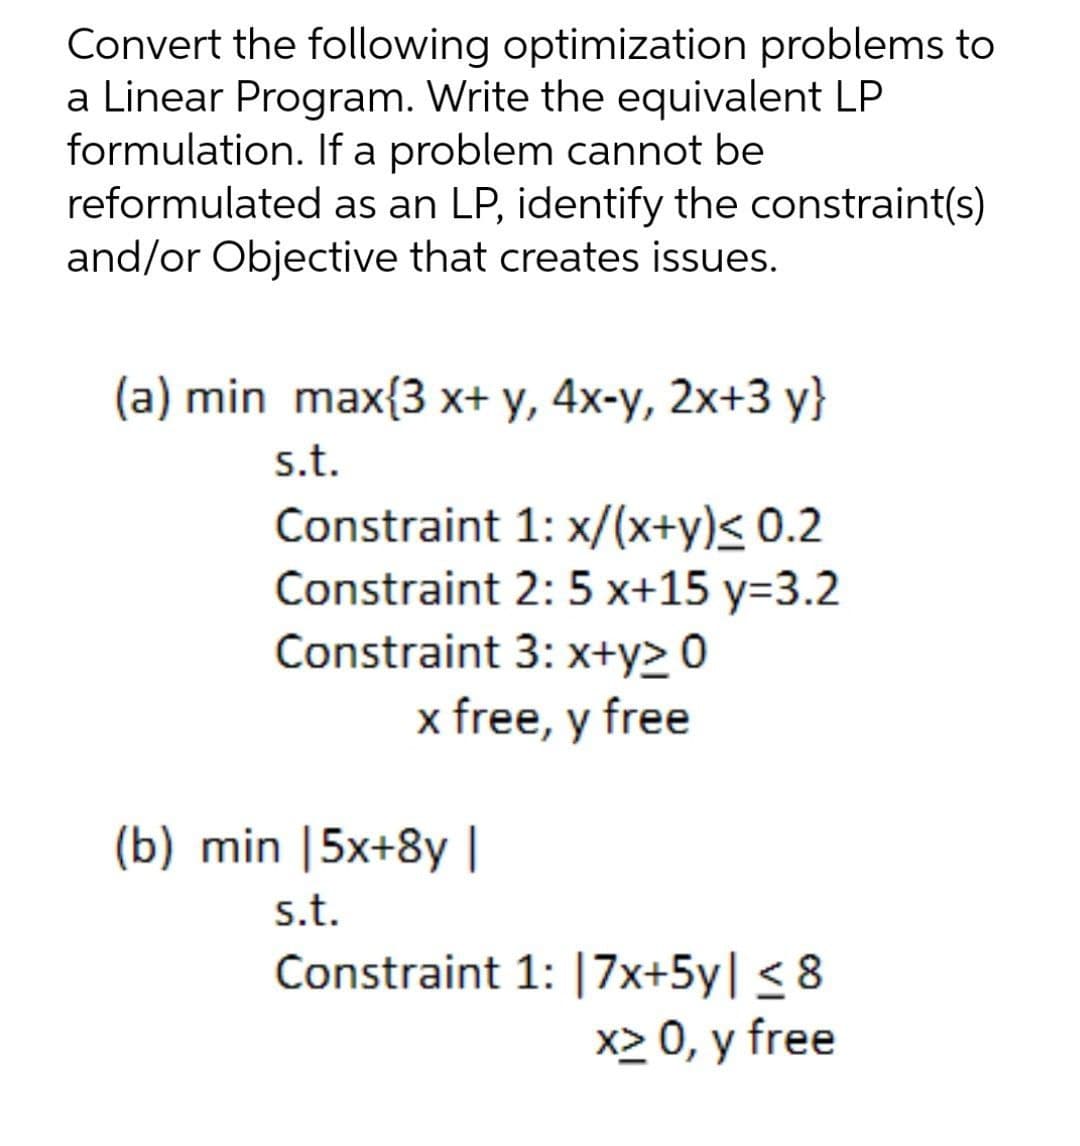 Convert the following optimization problems to
a Linear Program. Write the equivalent LP
formulation. If a problem cannot be
reformulated as an LP, identify the constraint(s)
and/or Objective that creates issues.
(a) min max{3 x+ y, 4x-y, 2x+3 y}
s.t.
Constraint 1: x/(x+y)< 0.2
Constraint 2: 5 x+15 y=3.2
Constraint 3: x+y> 0
x free, y free
(b) min |5x+8y |
s.t.
Constraint 1: |7x+5y| < 8
x> 0, y free
